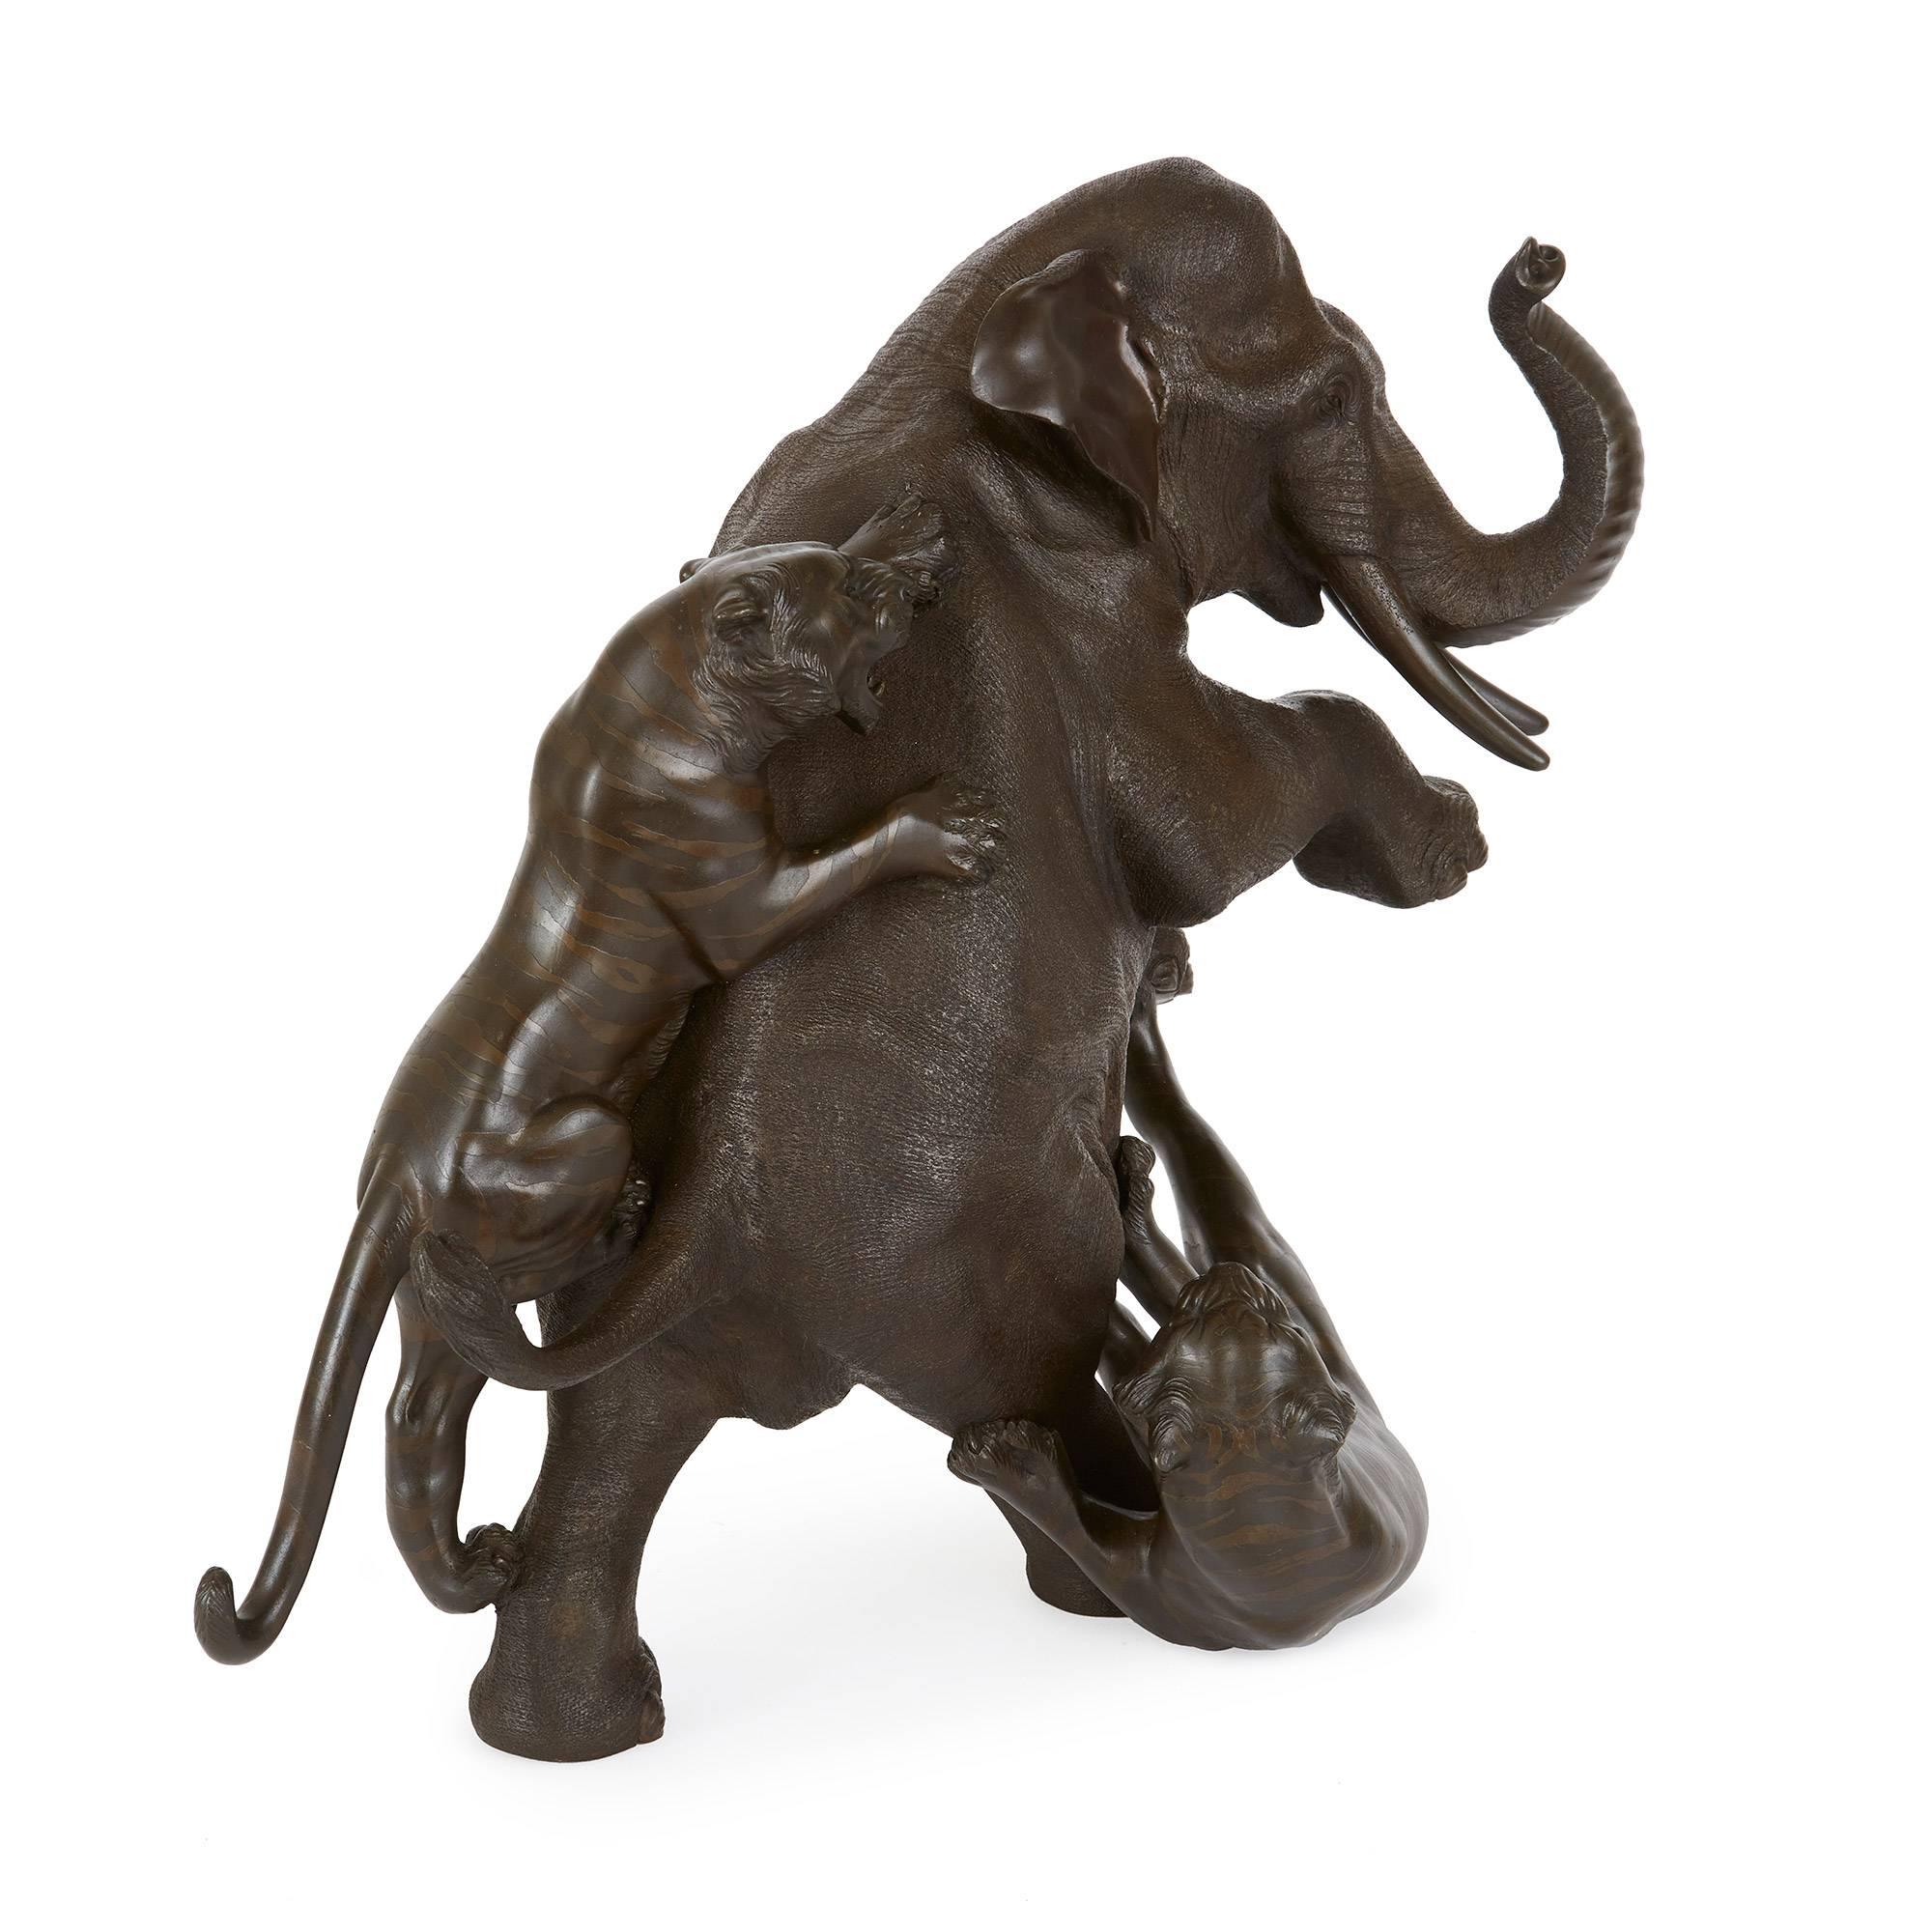 Meiji period, depicting an elephant being attacked by two tigers, with Japanese mark on the base.

Rendered in impressive naturalistic detail, this charming model dates to the Japanese Meiji period, a time famous for its high quality craftsmanship.